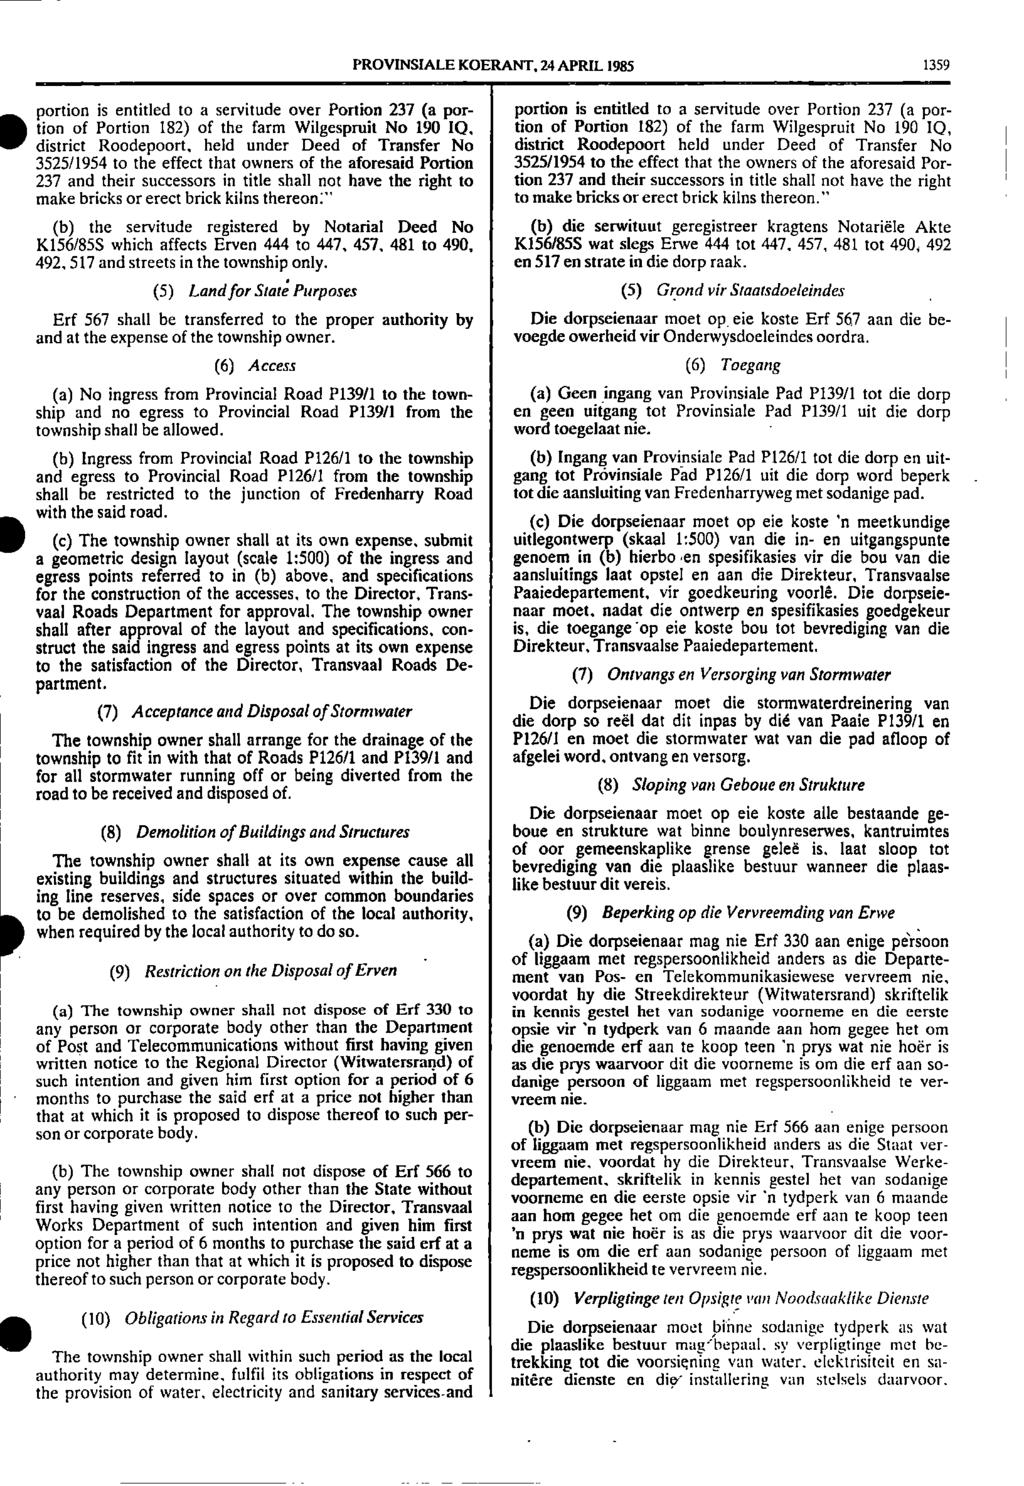 PROVINSIALE KOERANT, 24 APRIL 1985 1359 portion is entitled to a servitude over Portion 237 (a por portion is entitled to a servitude over Portion 237 (a por tion of Portion 182) of the farm